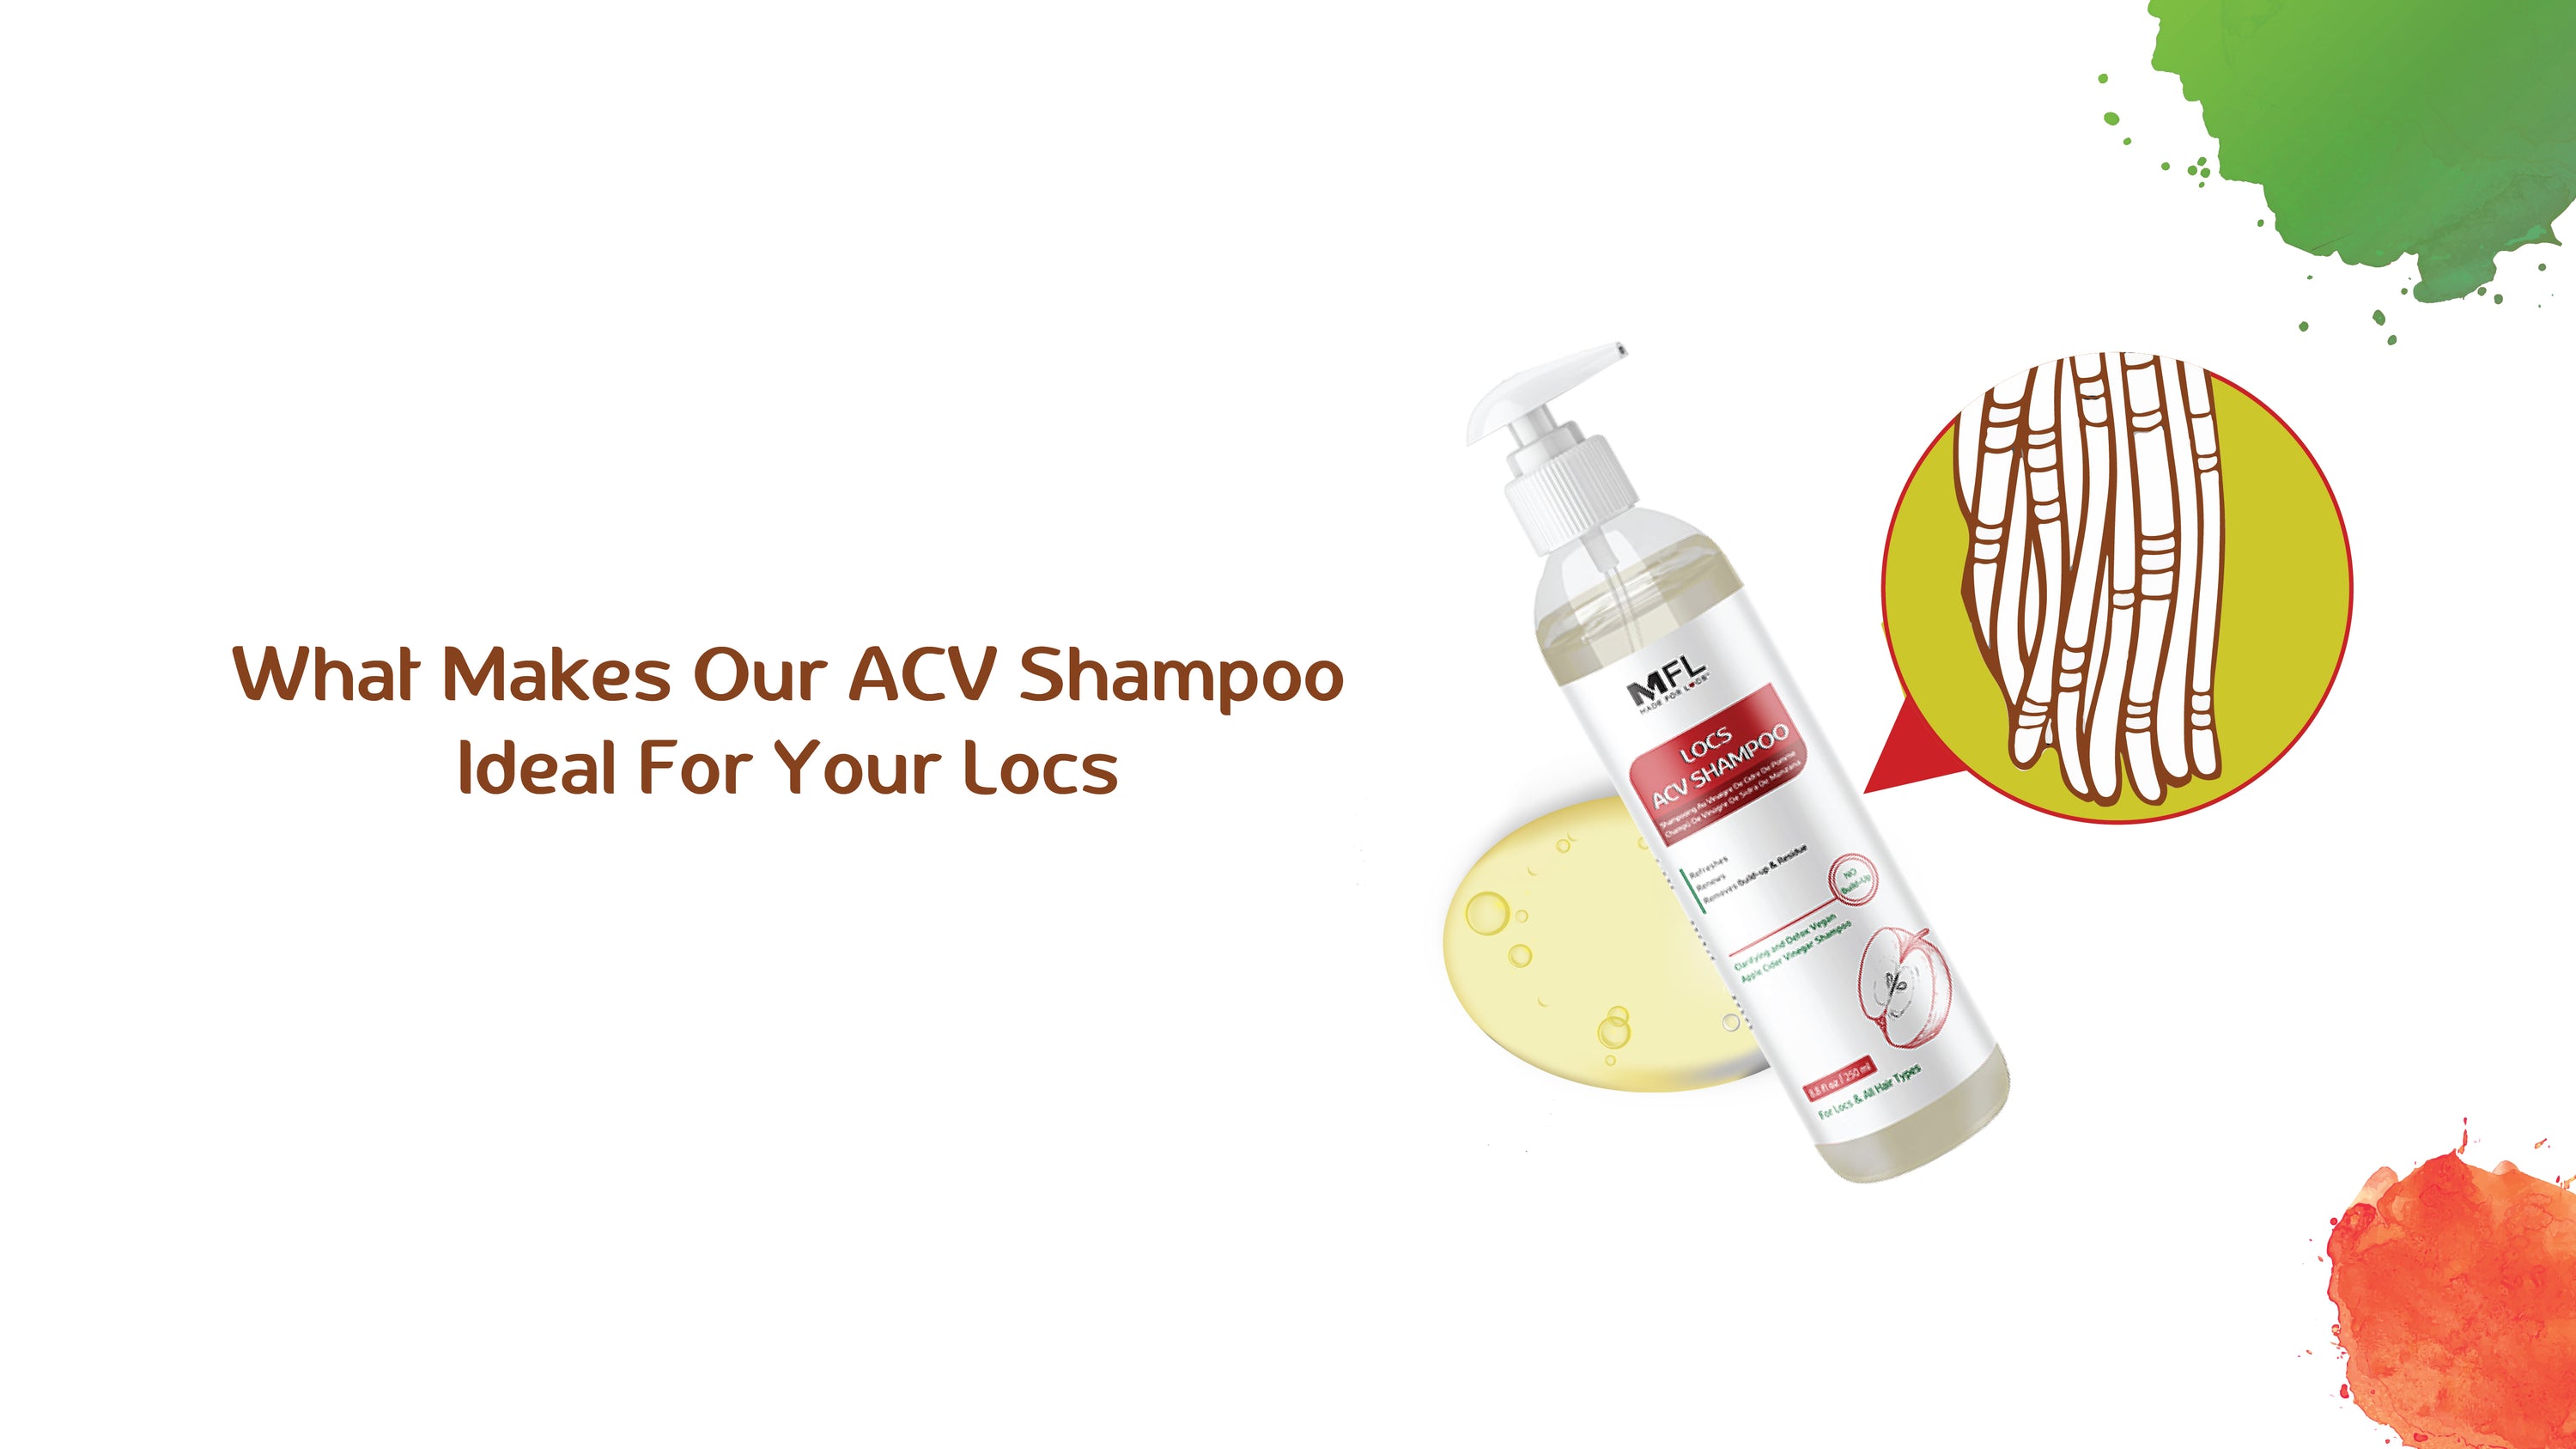 What Makes Our ACV Shampoo Ideal For Your Locs?